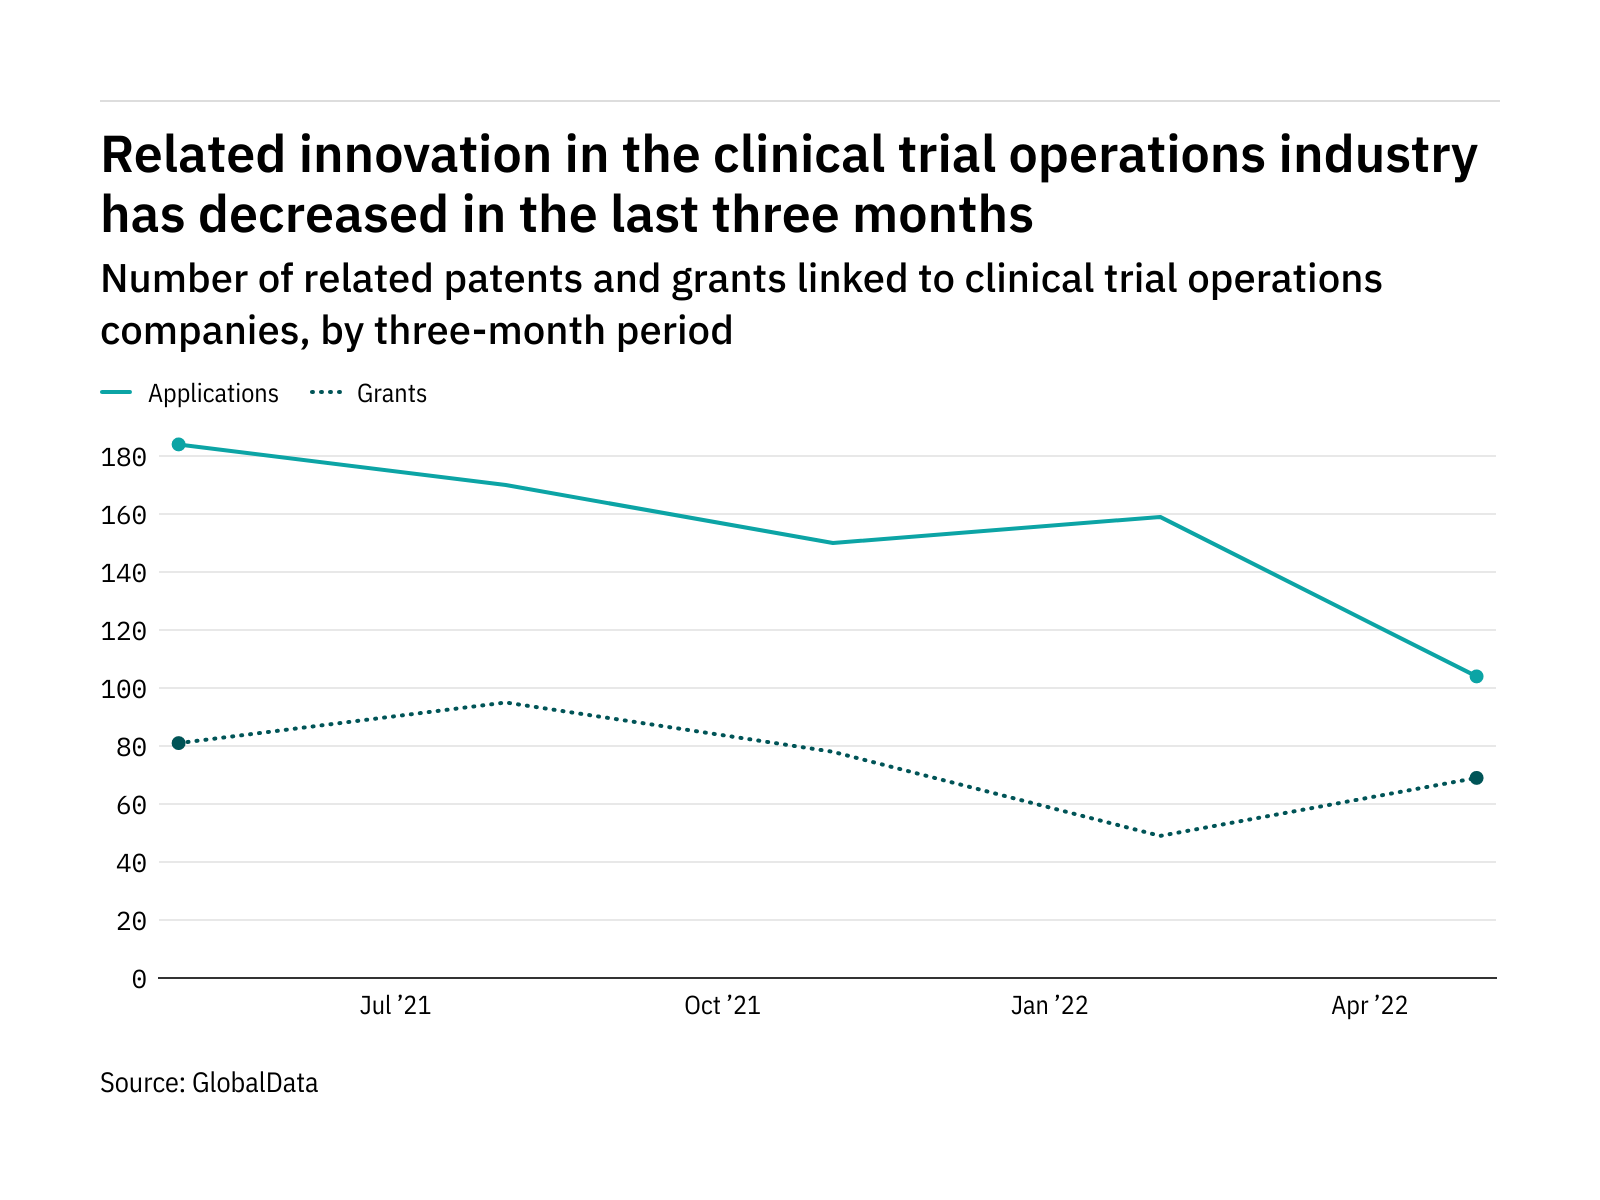 Cloud innovation in clinical trials dropped in three months ending May